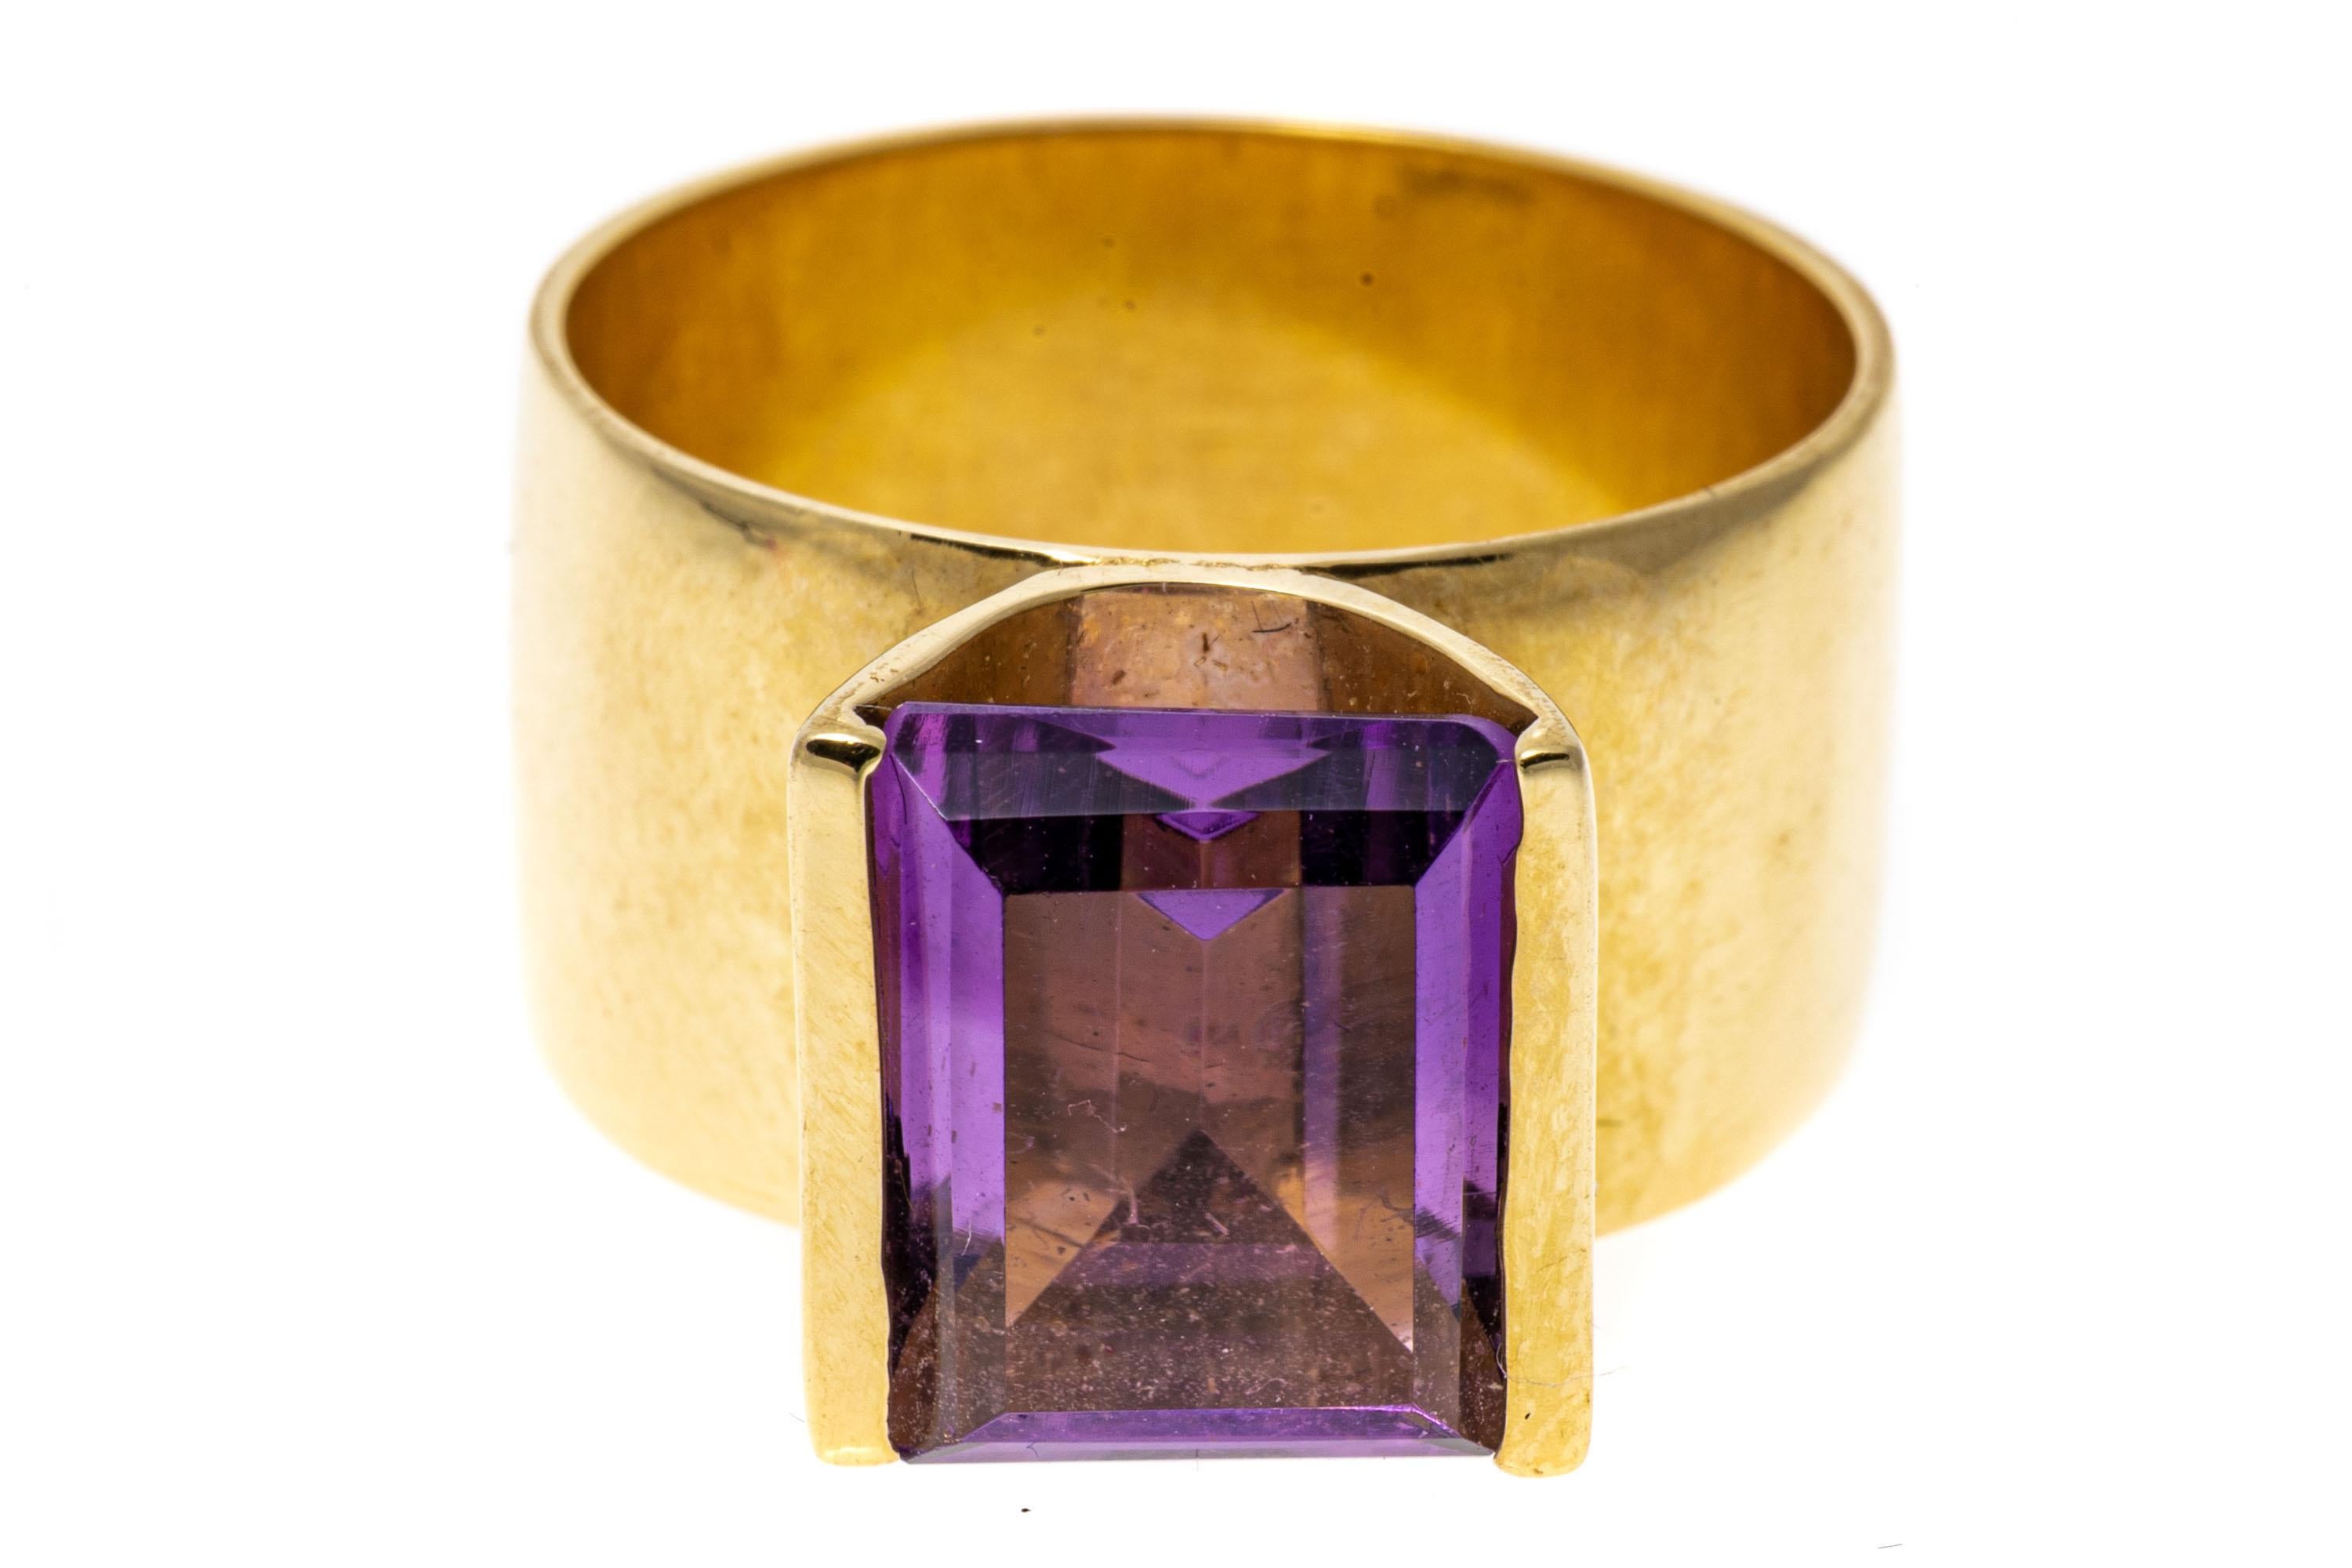 14k yellow gold ring. This contemporary ring has a rectangular faceted, light purple color amethyst, approximately 2.50 CTS, framed by half bezels and a 